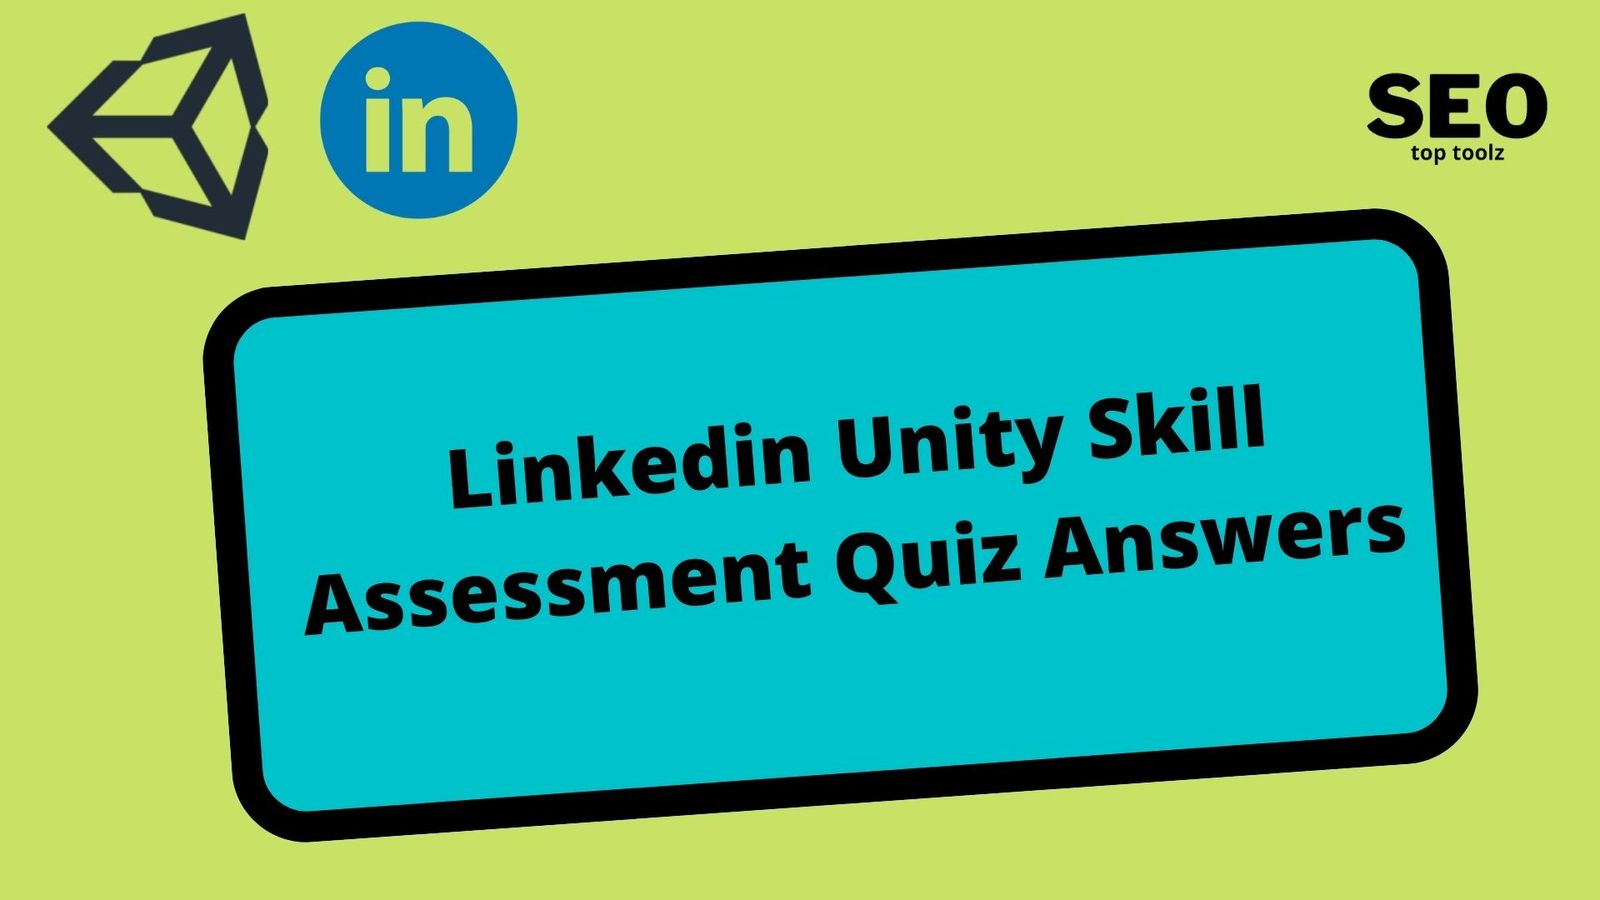 linkedin-unity-skill-assessment-quiz-answers-2022-updated